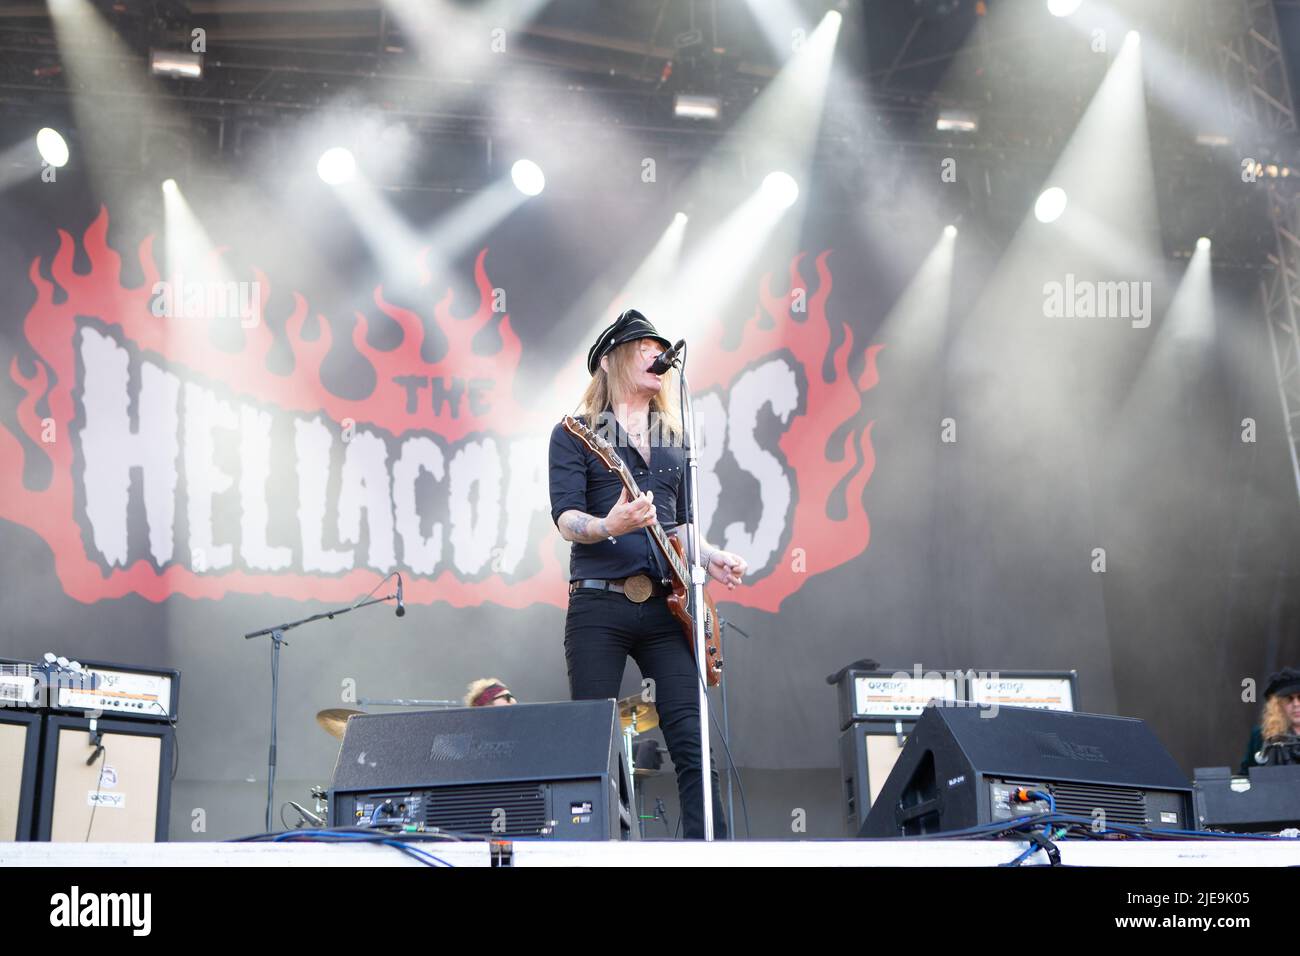 Oslo, Norway. 24th, June 2022. The Swedish hard rock band The Hellacopters performs a live concert during the Norwegian music festival Tons of Rock 2022 in Oslo. Here vocalist and guitarist Nicke Andersson is seen live on stage. (Photo credit: Gonzales Photo - Per-Otto). Stock Photo